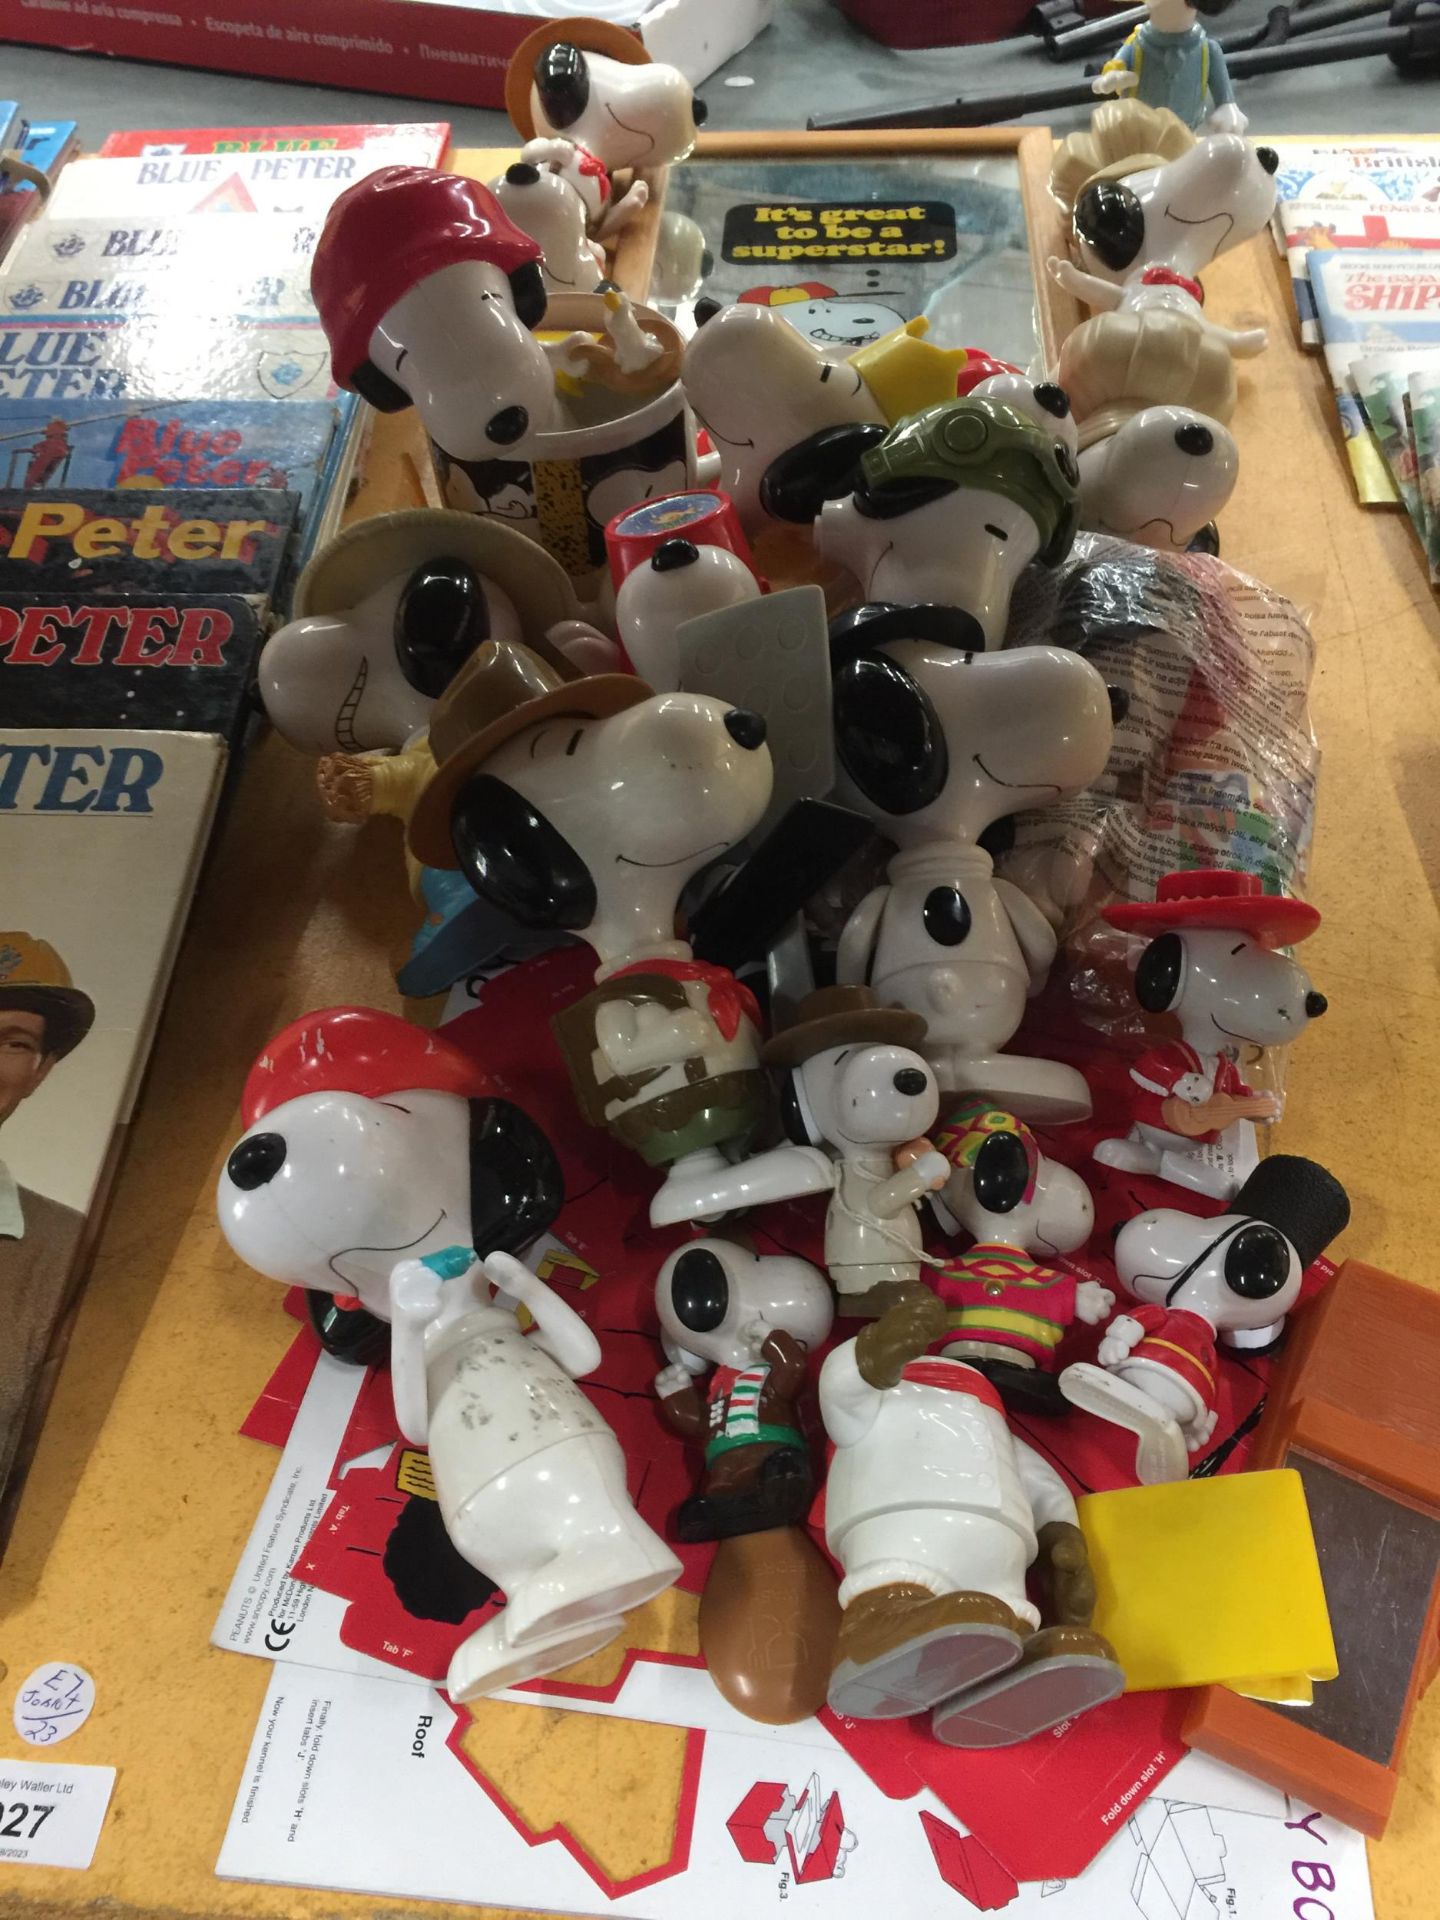 A COLLECTION OF SNOOPY TOYS, MIRROR ETC